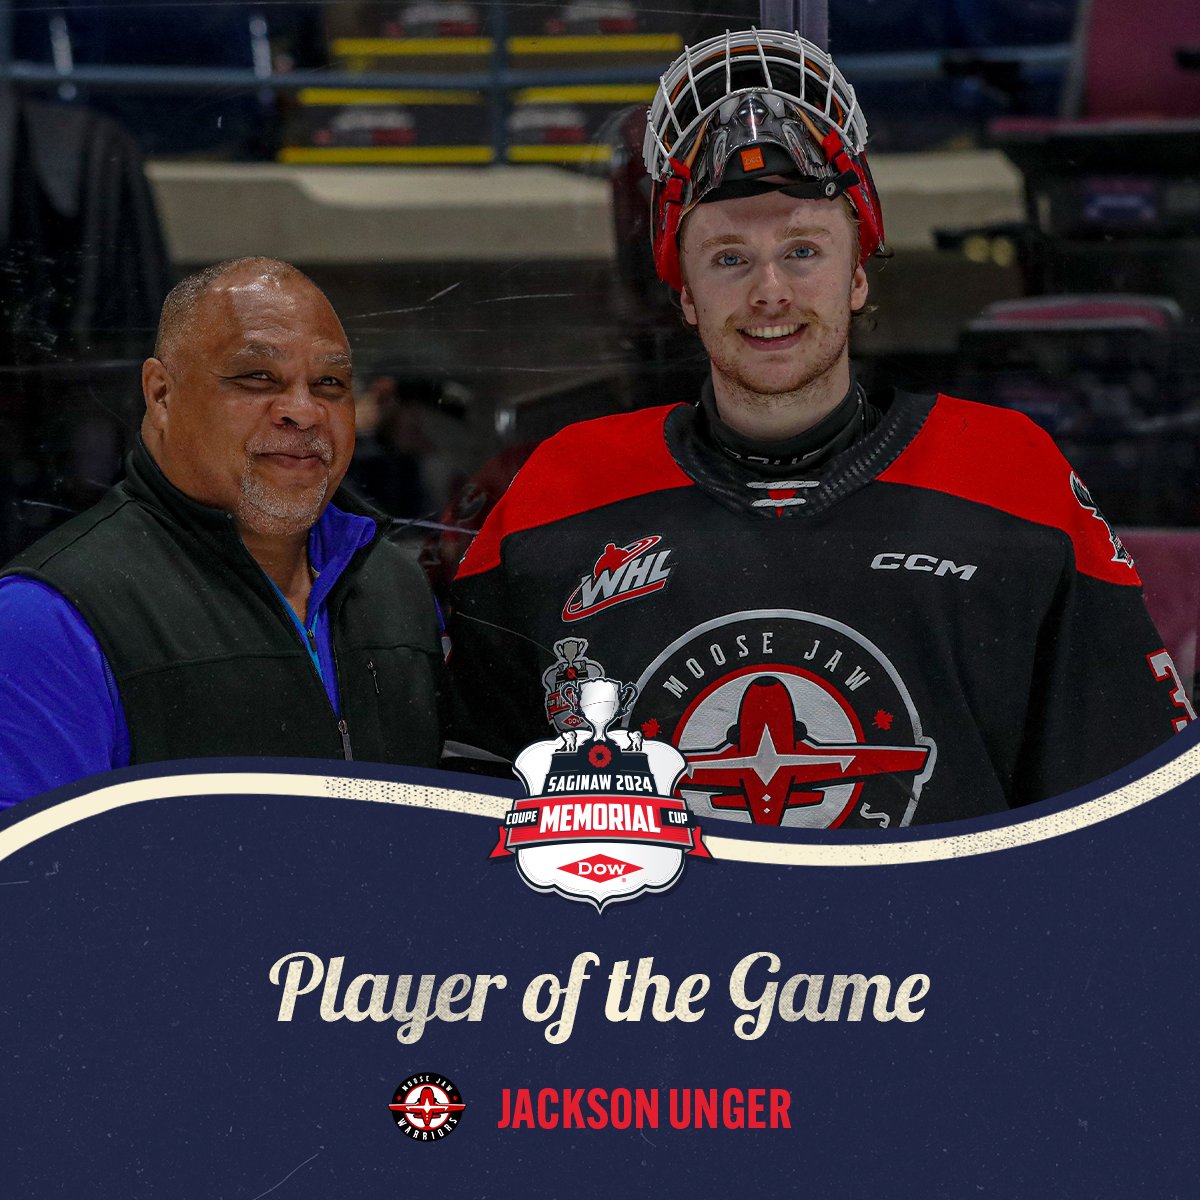 With a 49-save performance, the @MJWARRIORS' Jackson Unger is tonight's Player of the Game! #MemorialCup